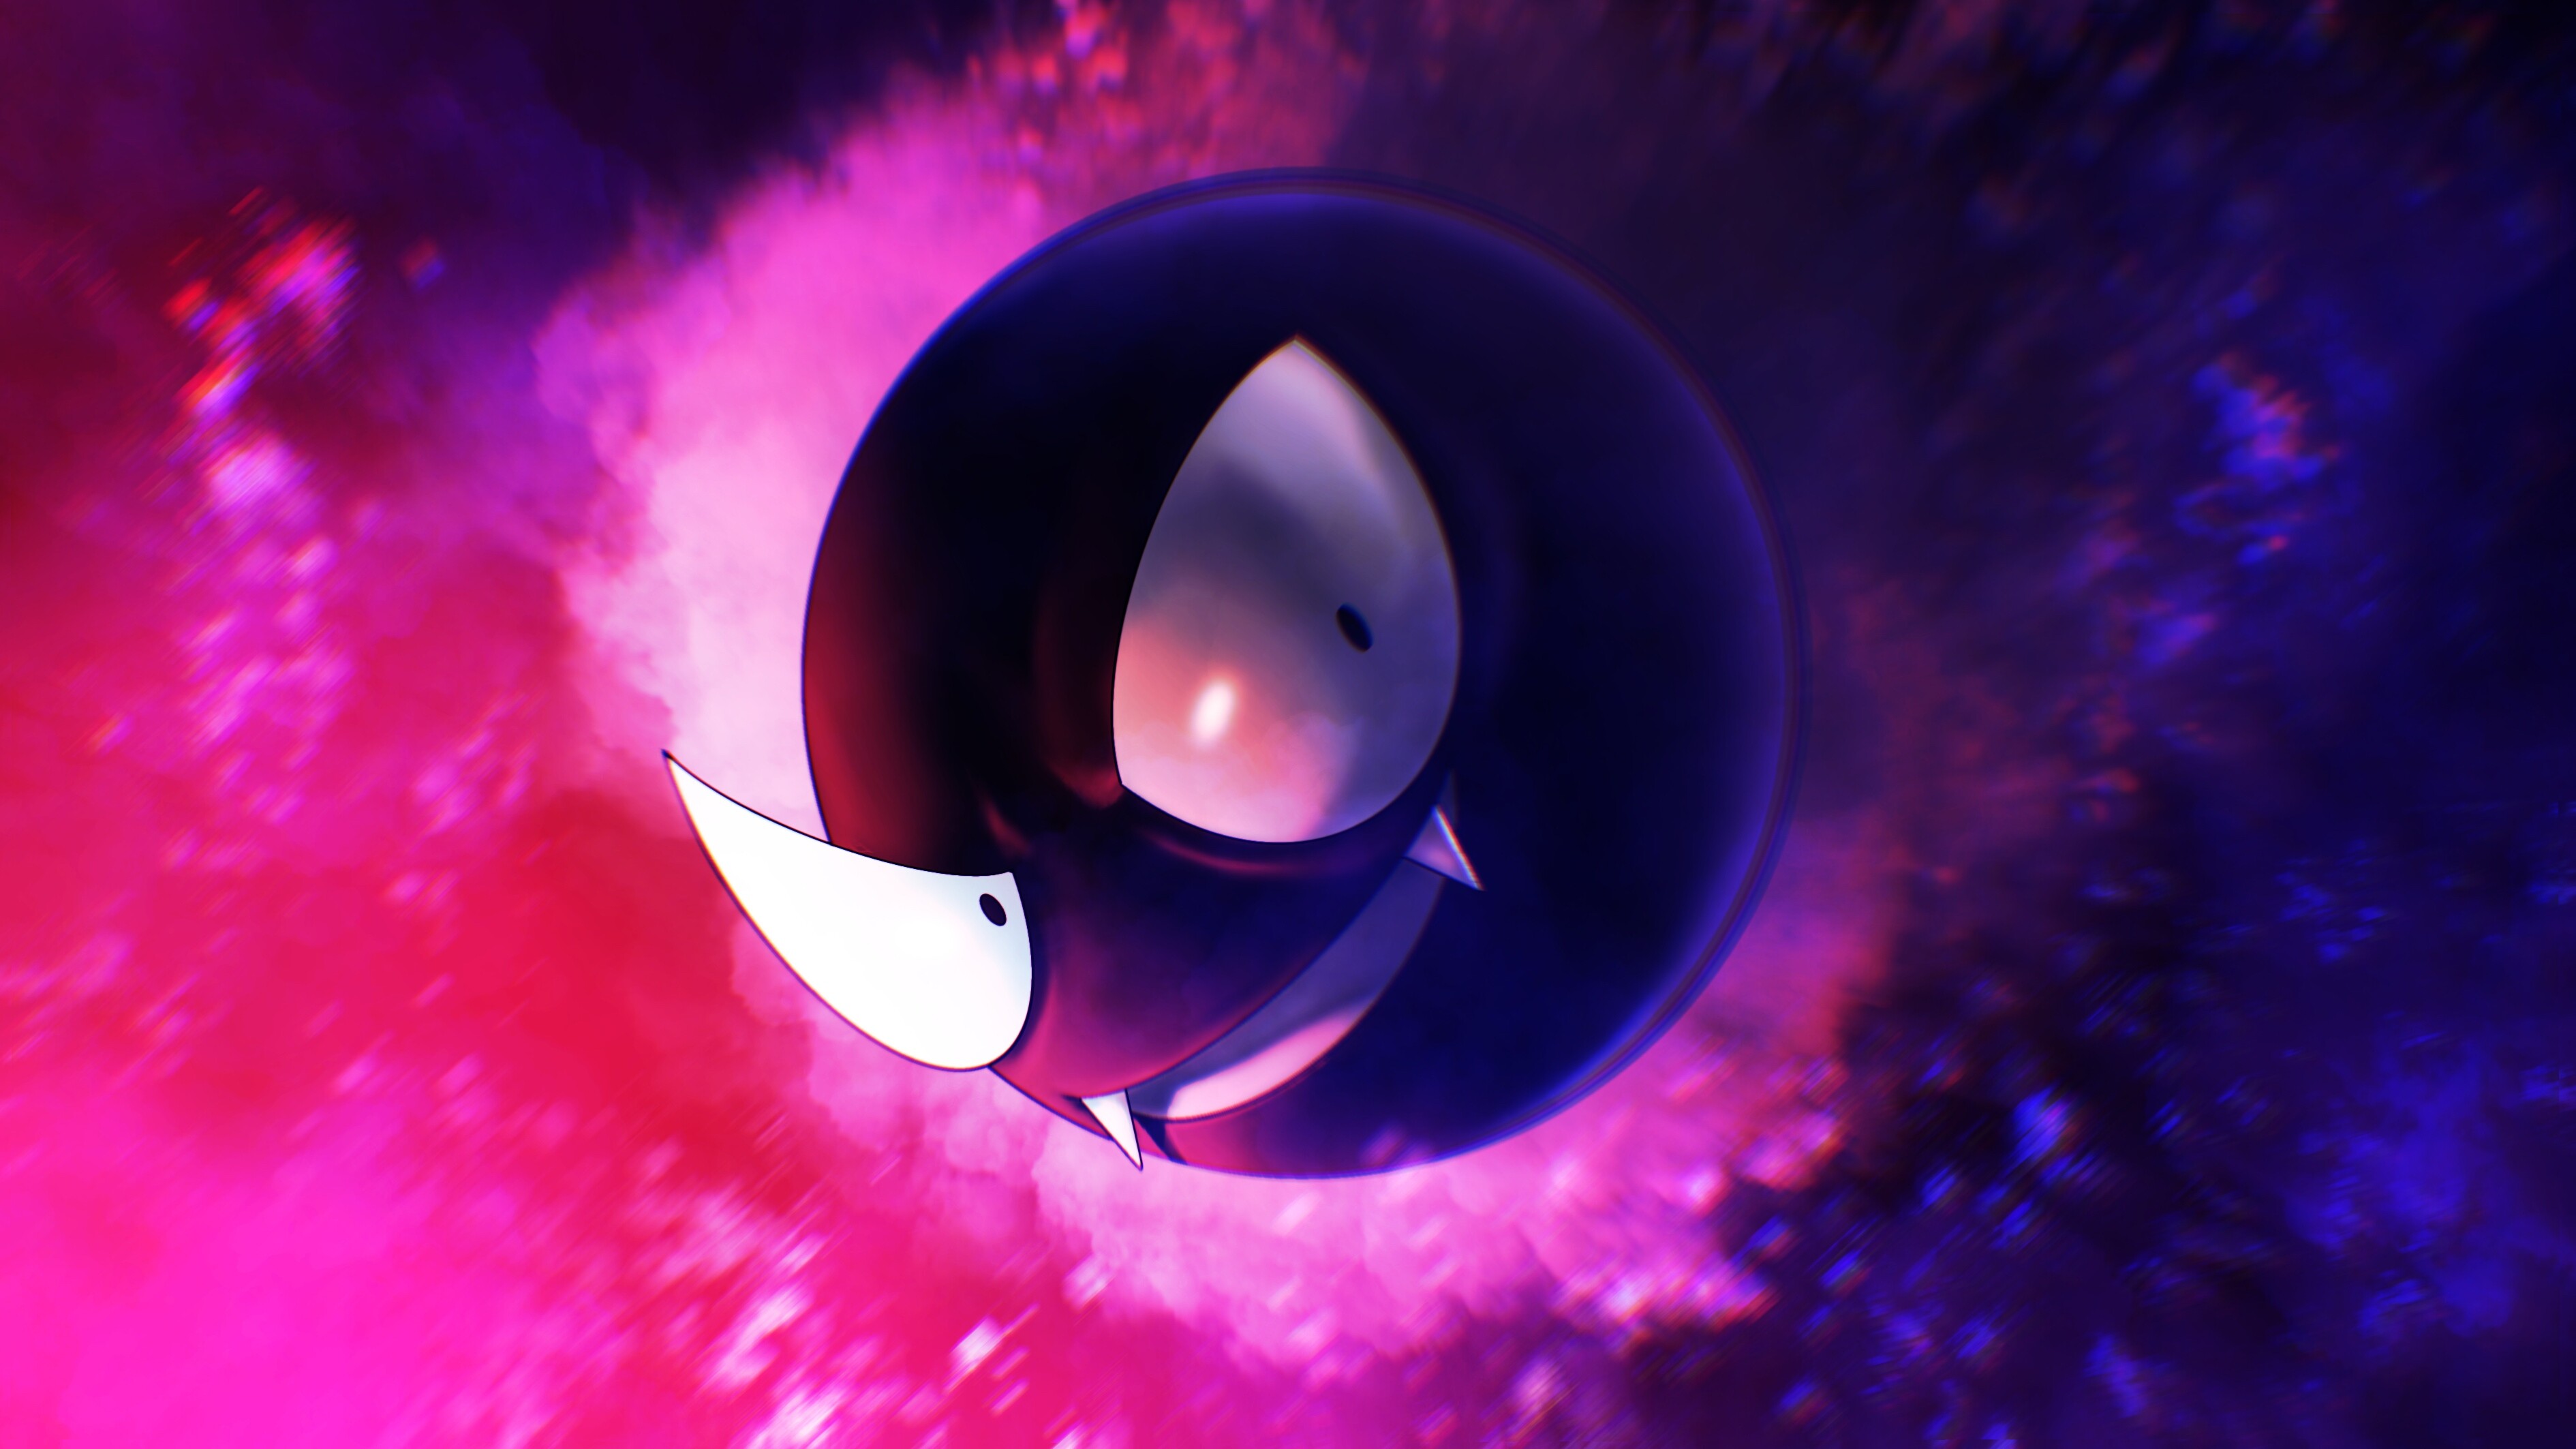 Gastly: Vaporous Pokemon that cloaks the target and puts it to sleep without notice. 3780x2130 HD Wallpaper.